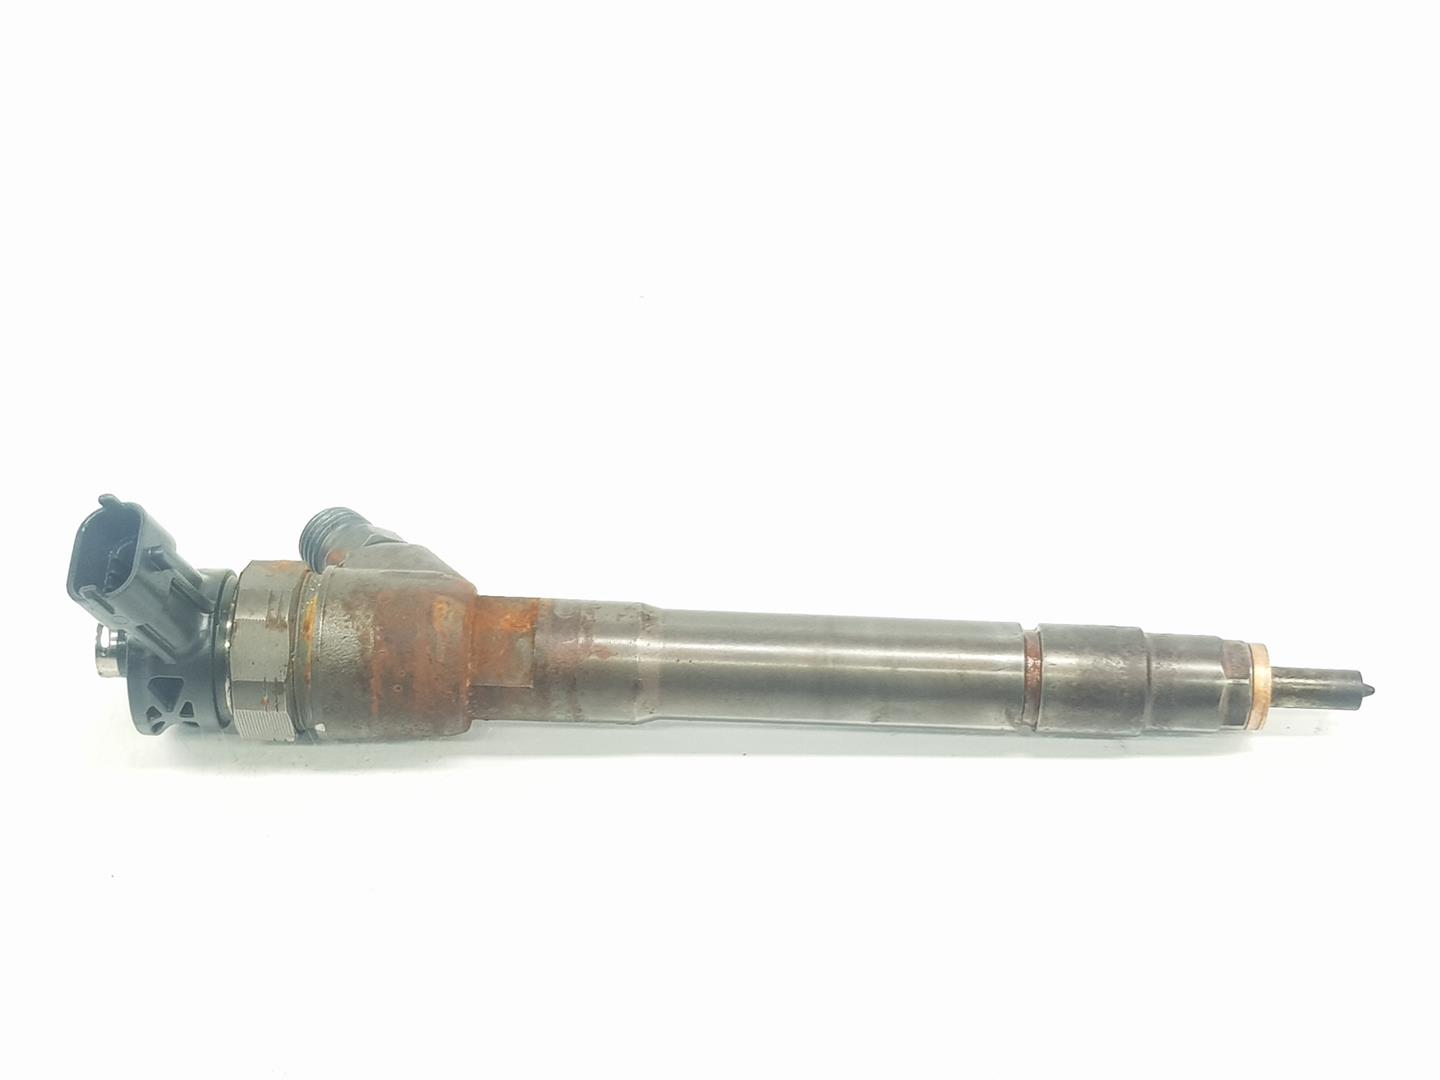 RENAULT Trafic 2 generation (2001-2015) Fuel Injector 166105302R, 166105302R, 1111AA 24224240